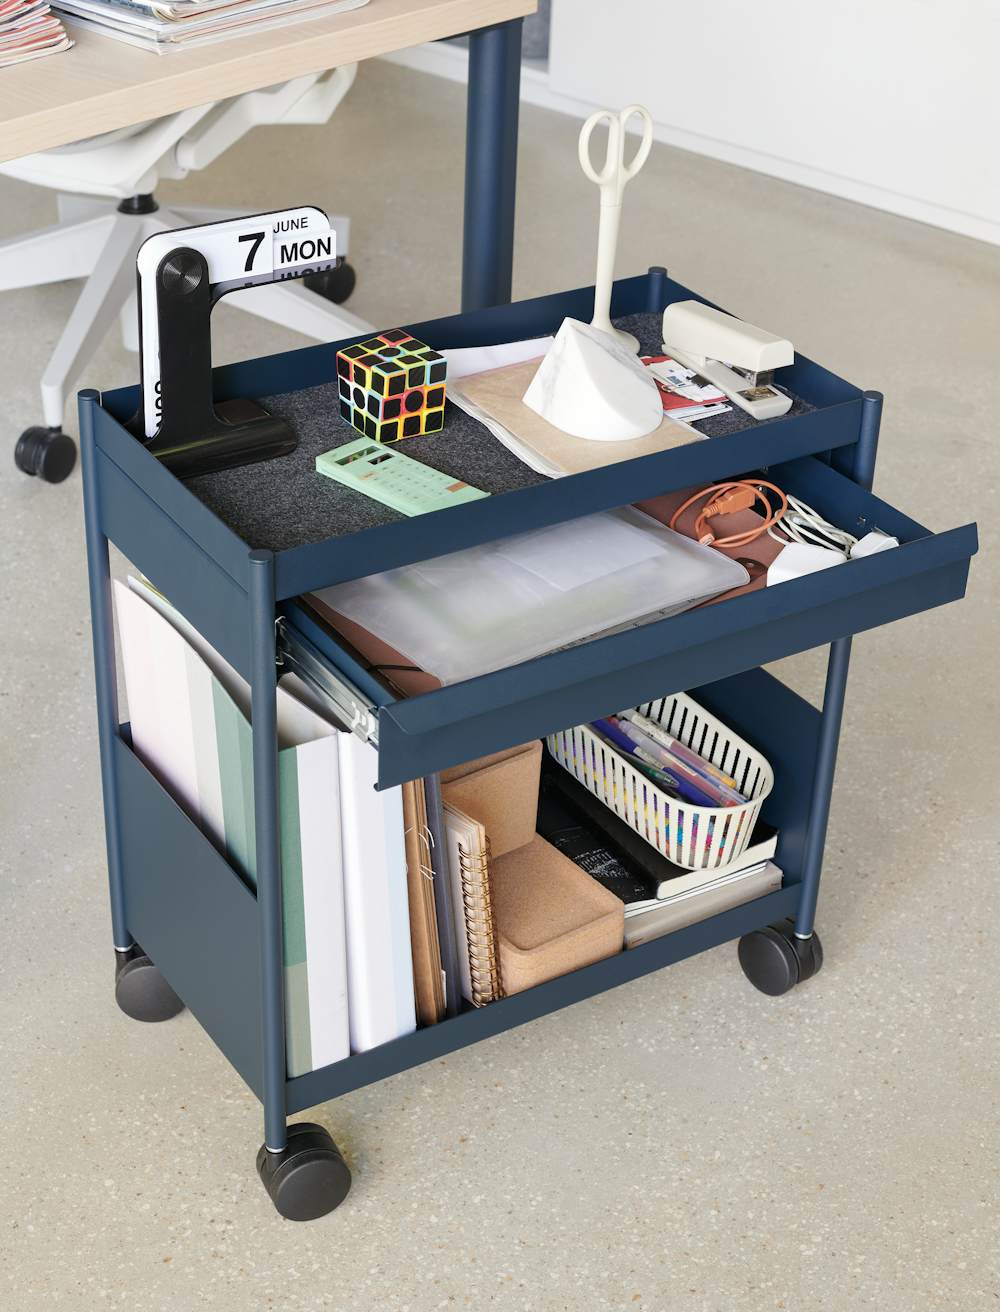 Blue OE1 Storage Trolley with casters in home office setting